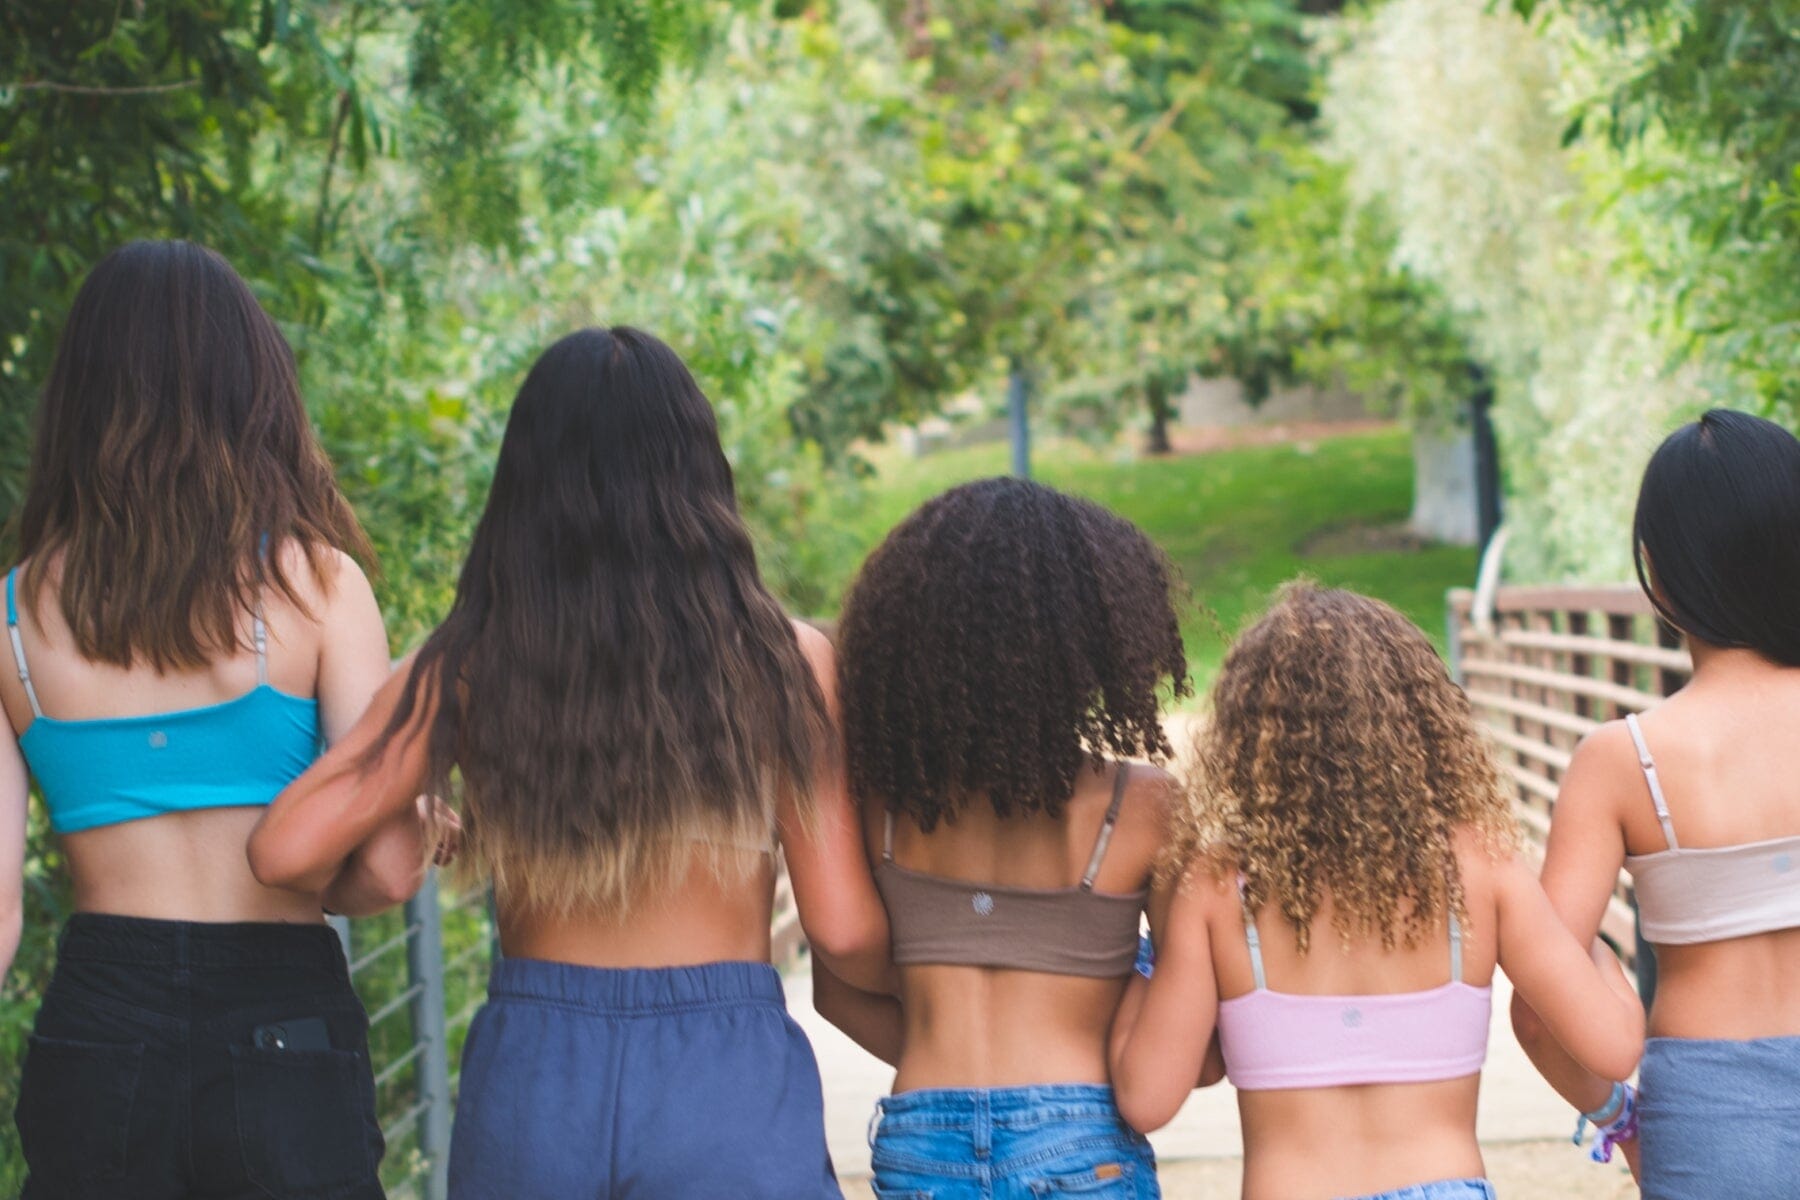 The Perfect Bra For Teens and Tweens – Non Disclosure Apparel